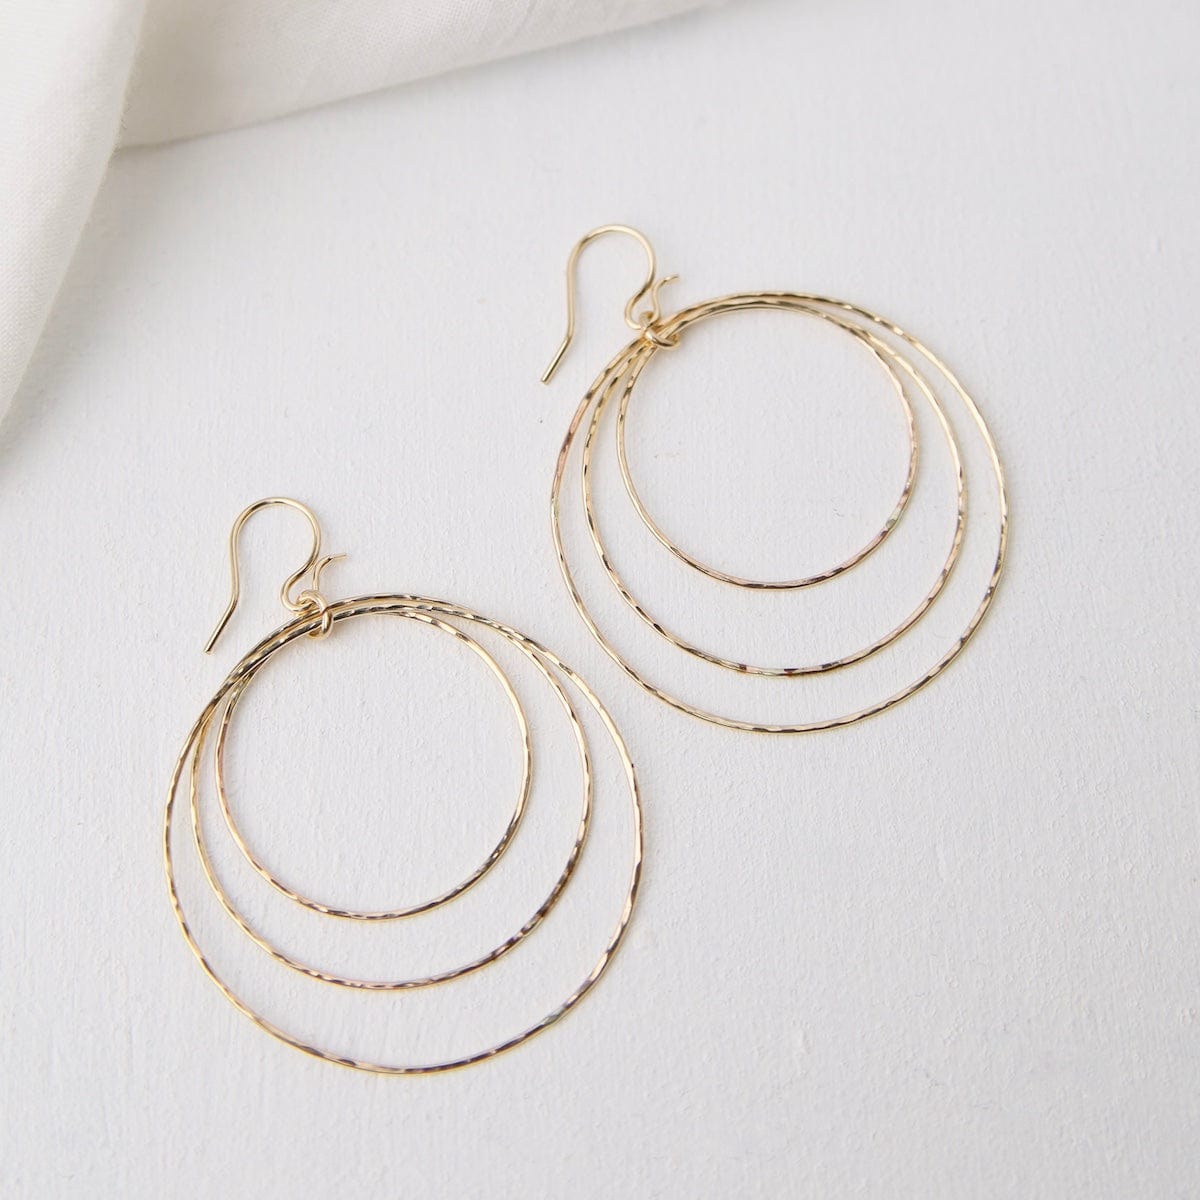 EAR-GF 3 Hammered Circle Earring - gold Filled